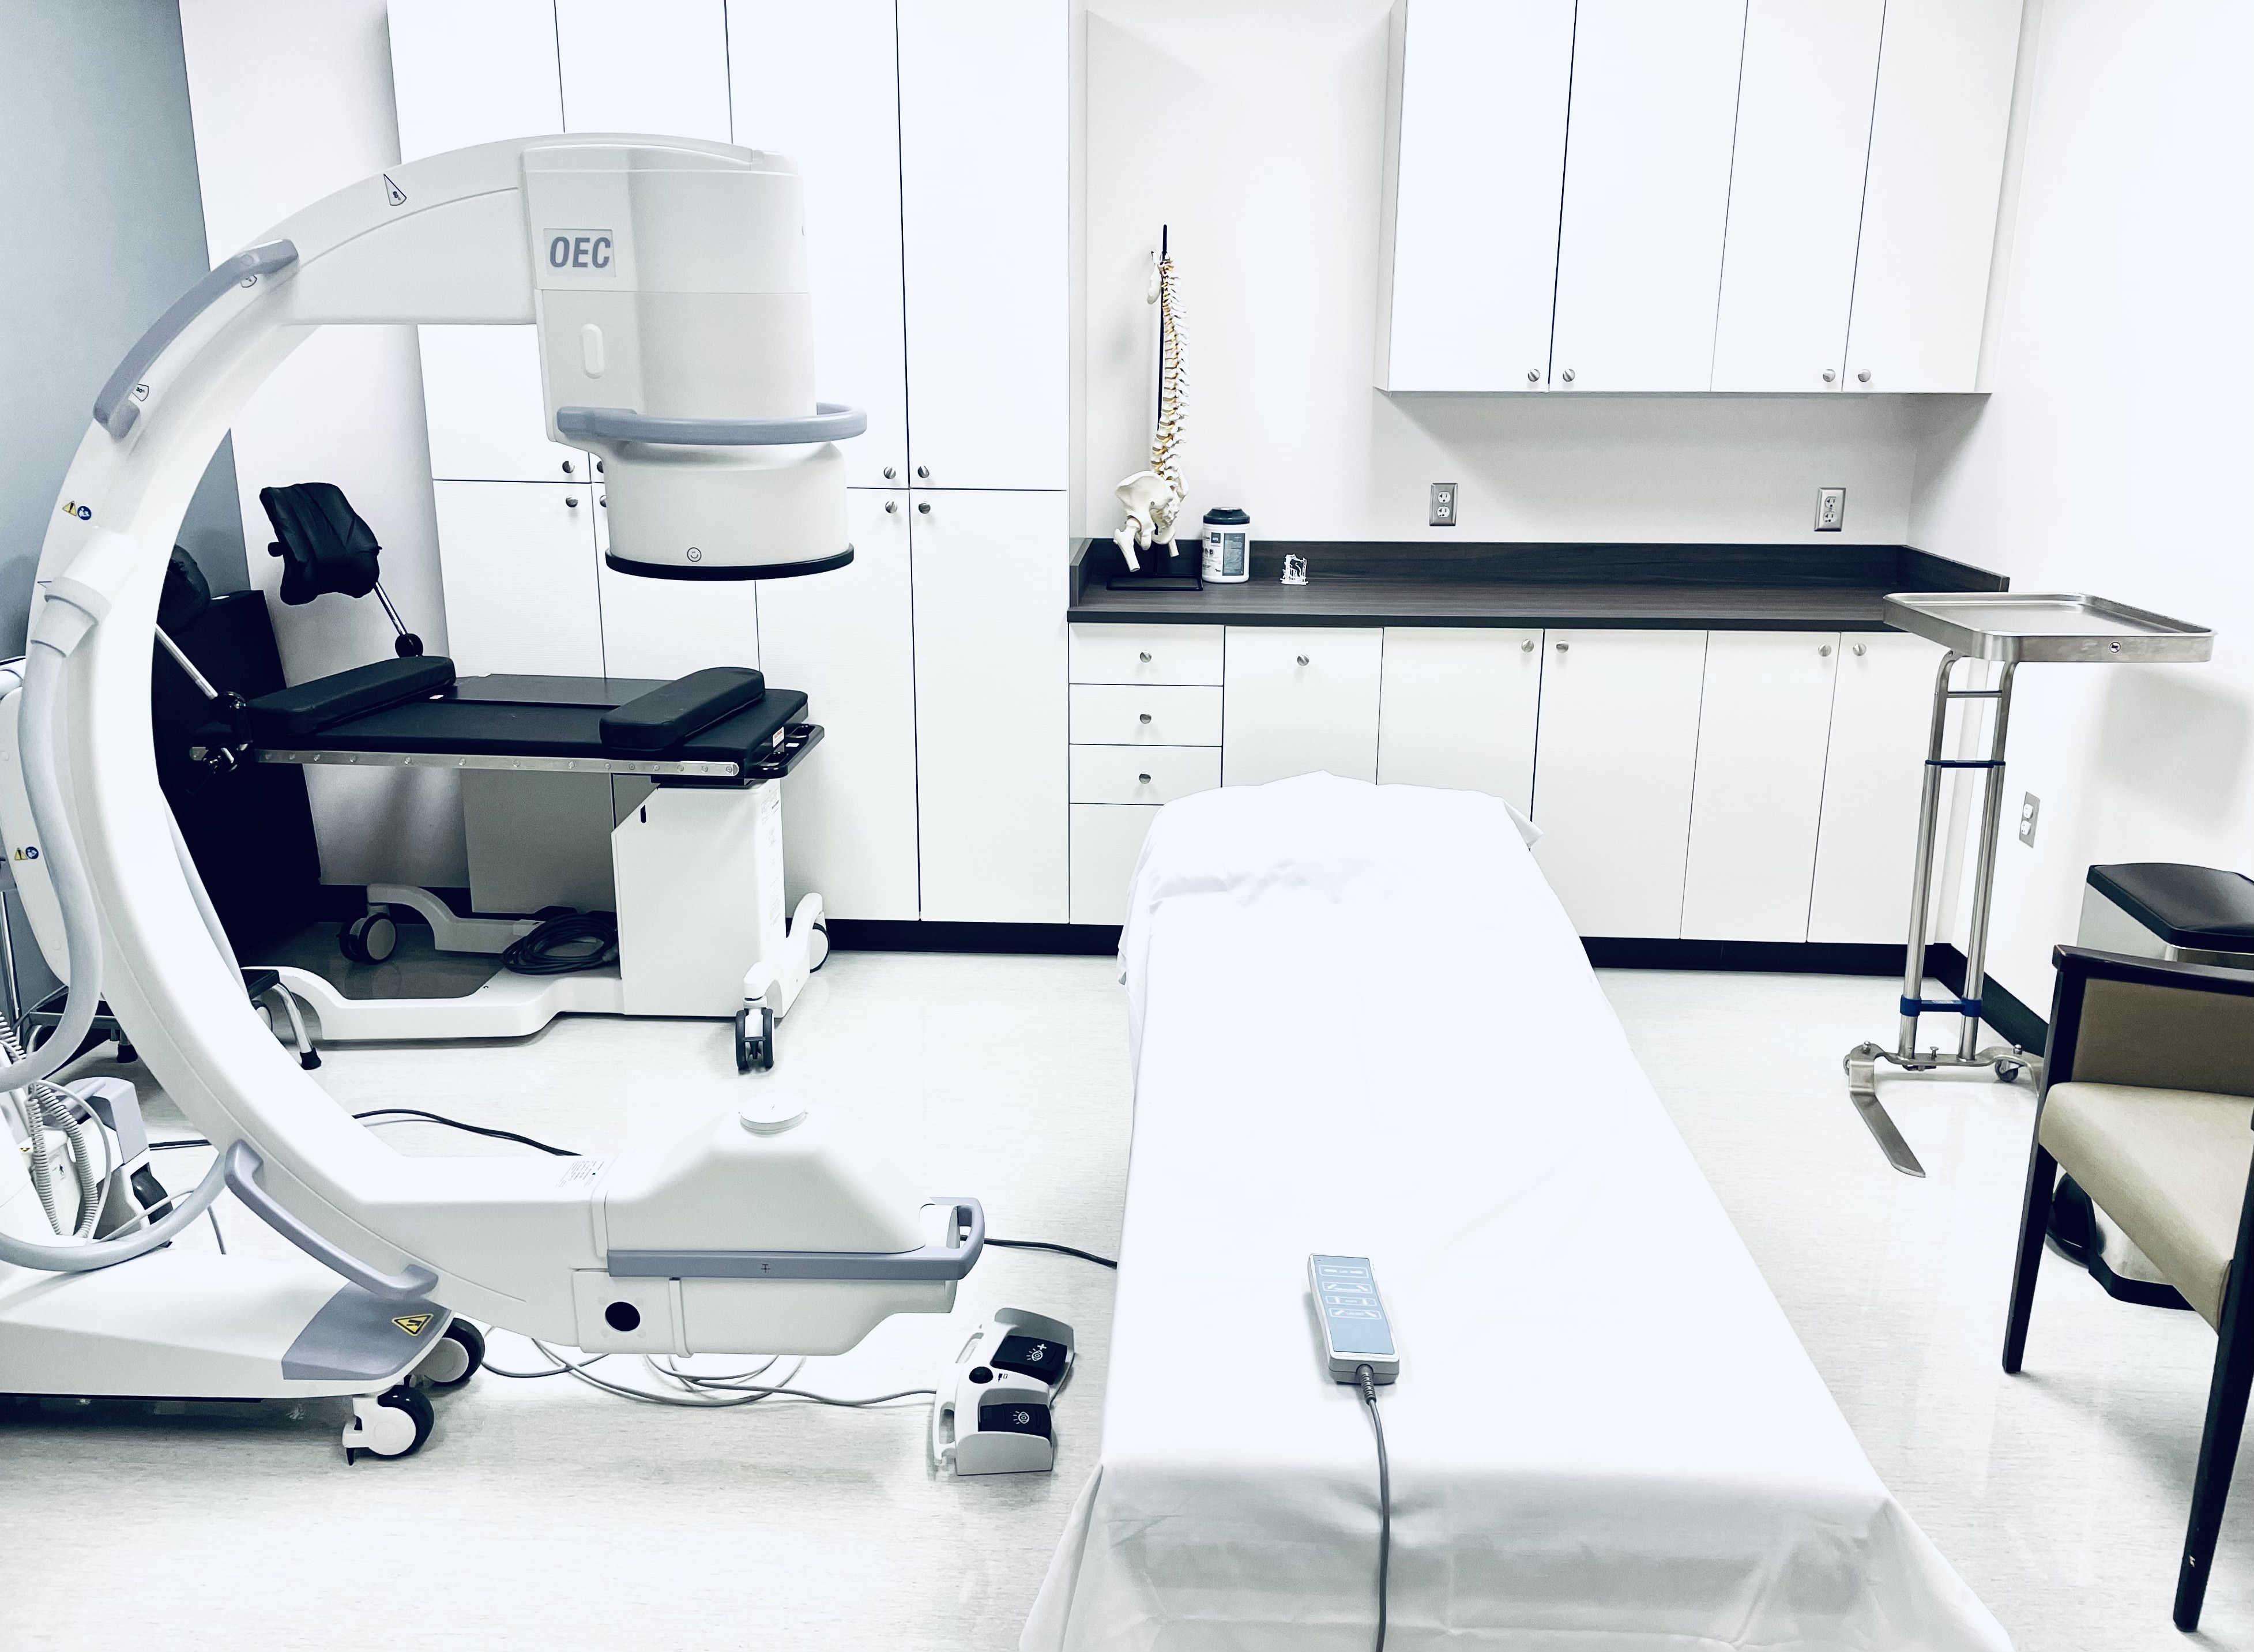 How Much Radiation Shielding Do I Need For My Medical Clinic?